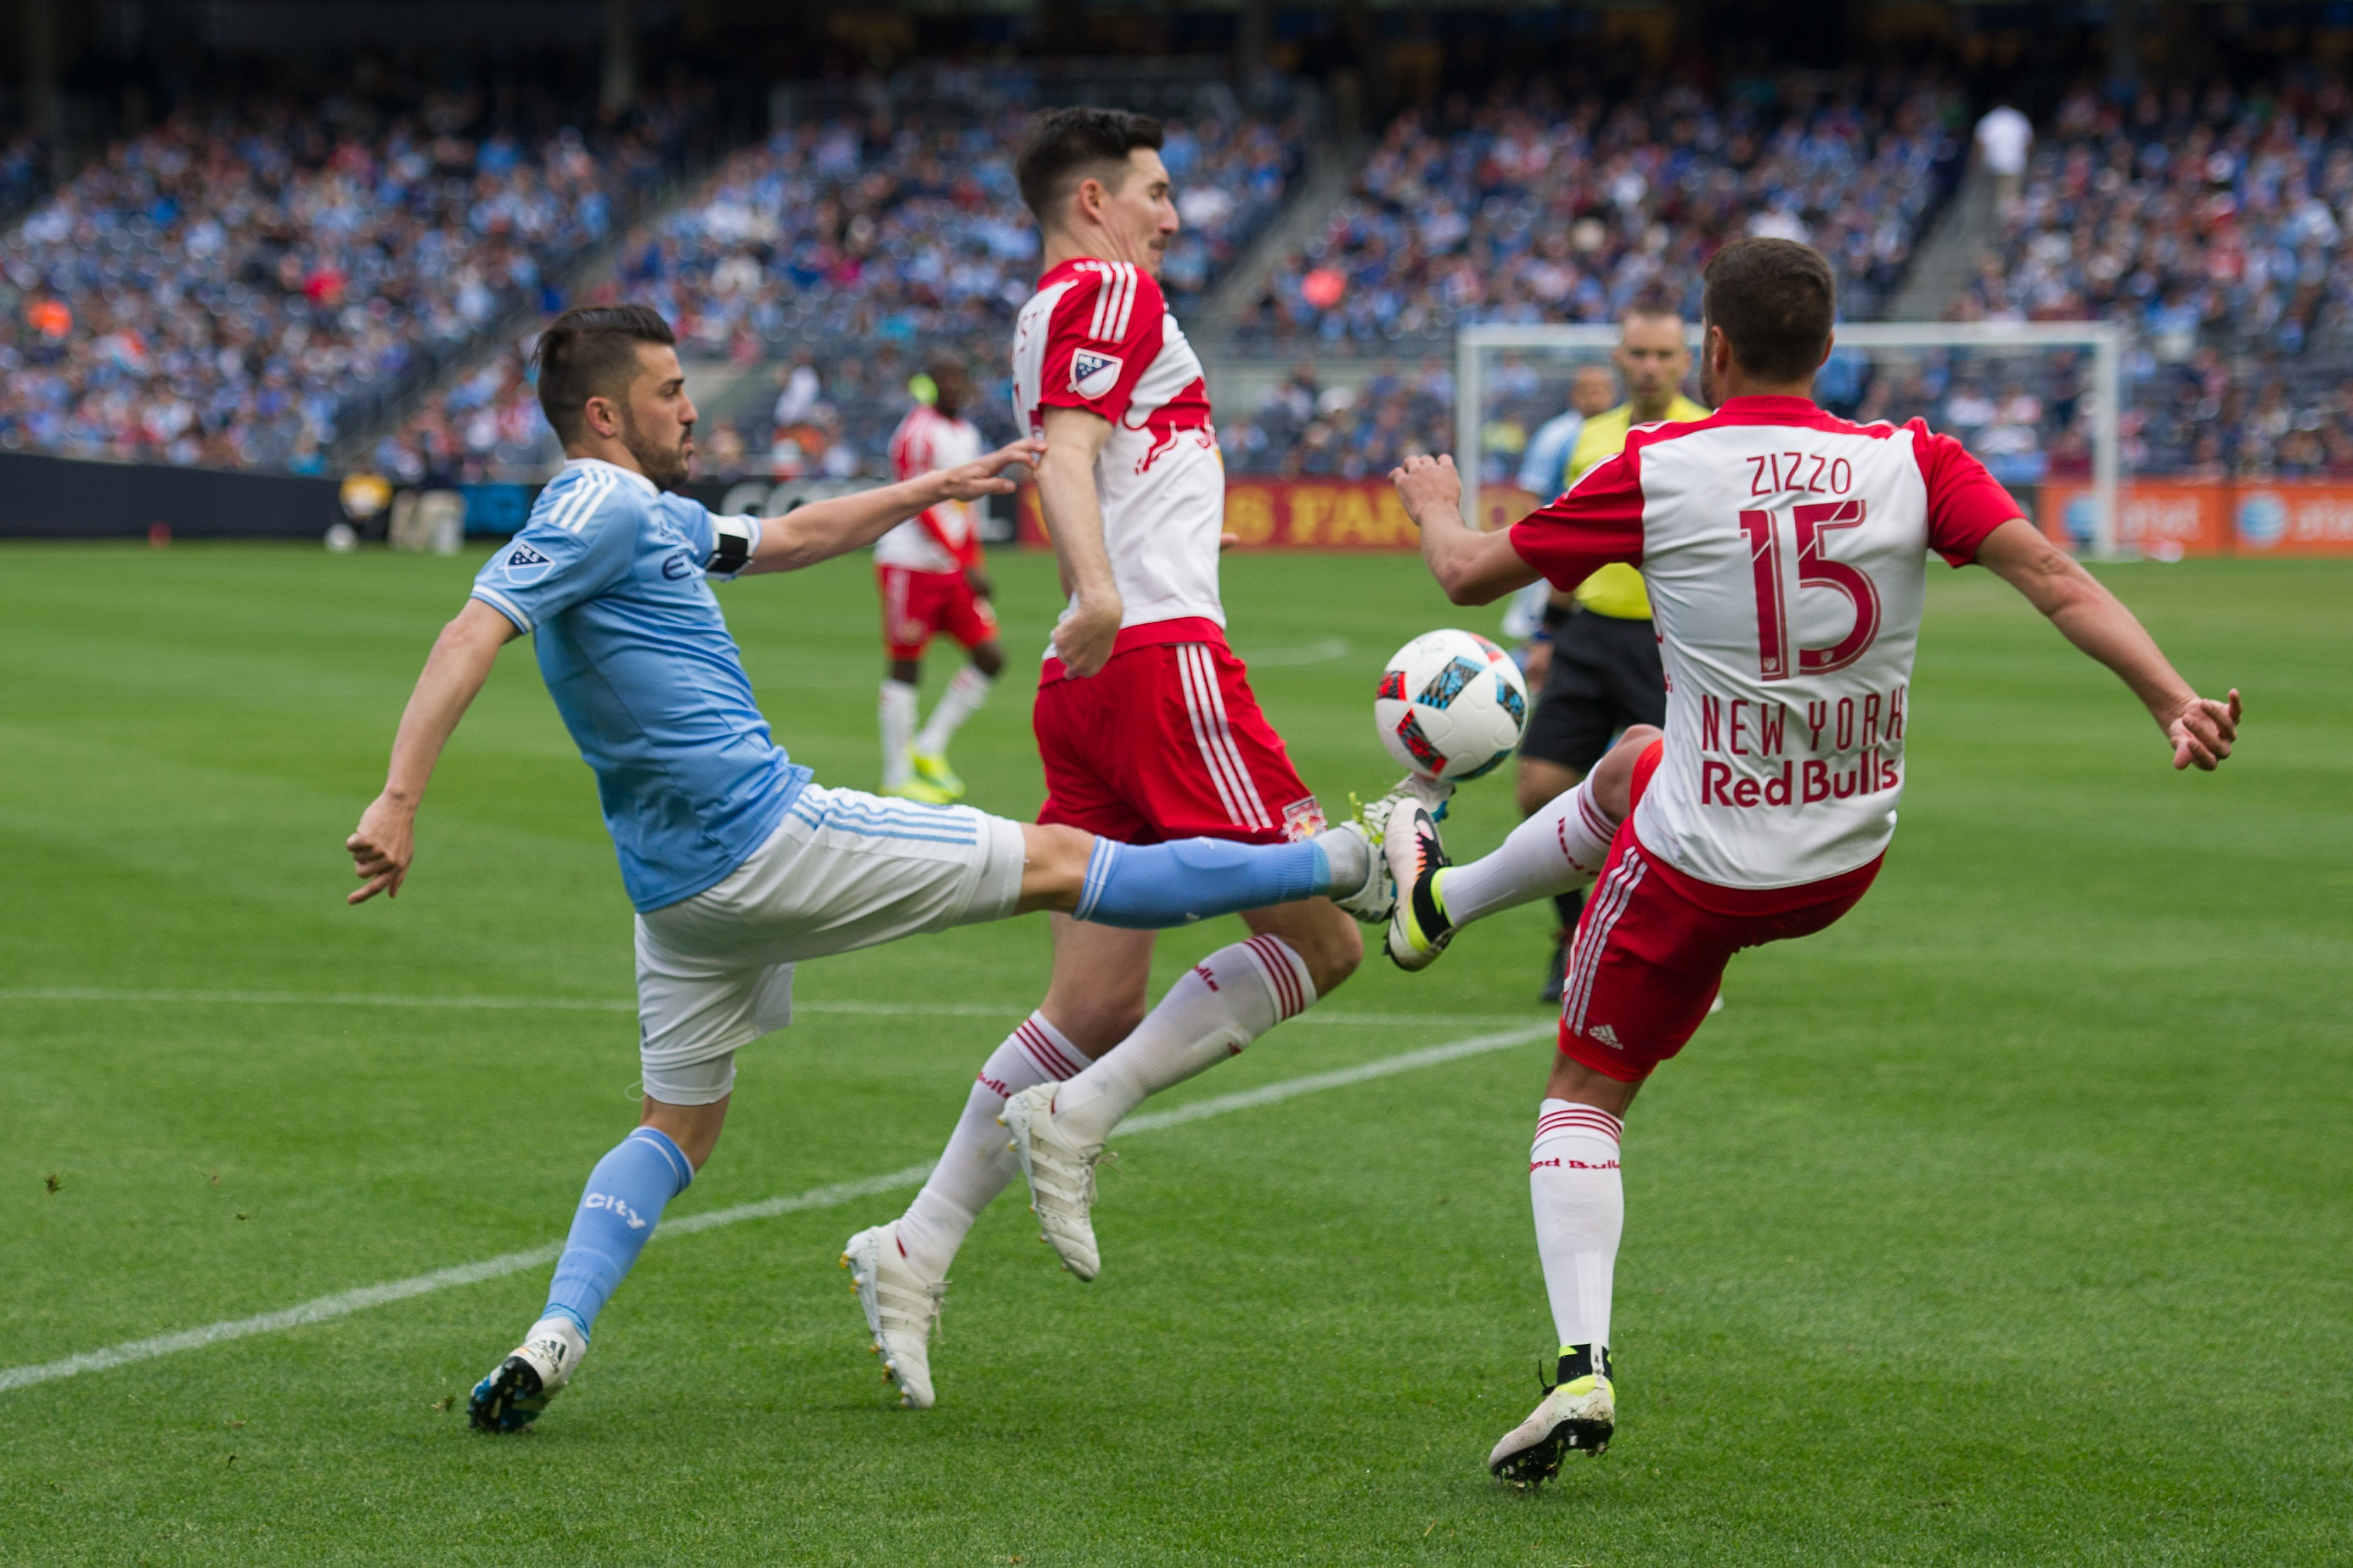 May 21, 2016; New York, NY, USA; New York City FC forward David Villa (7) and New York Red Bulls midfielder Salvatore Zizzo (15) fight for the ball in the second half at Yankee Stadium. New York Red Bulls defeat the New York City FC 7-0.Mandatory Credit: William Hauser-USA TODAY Sports